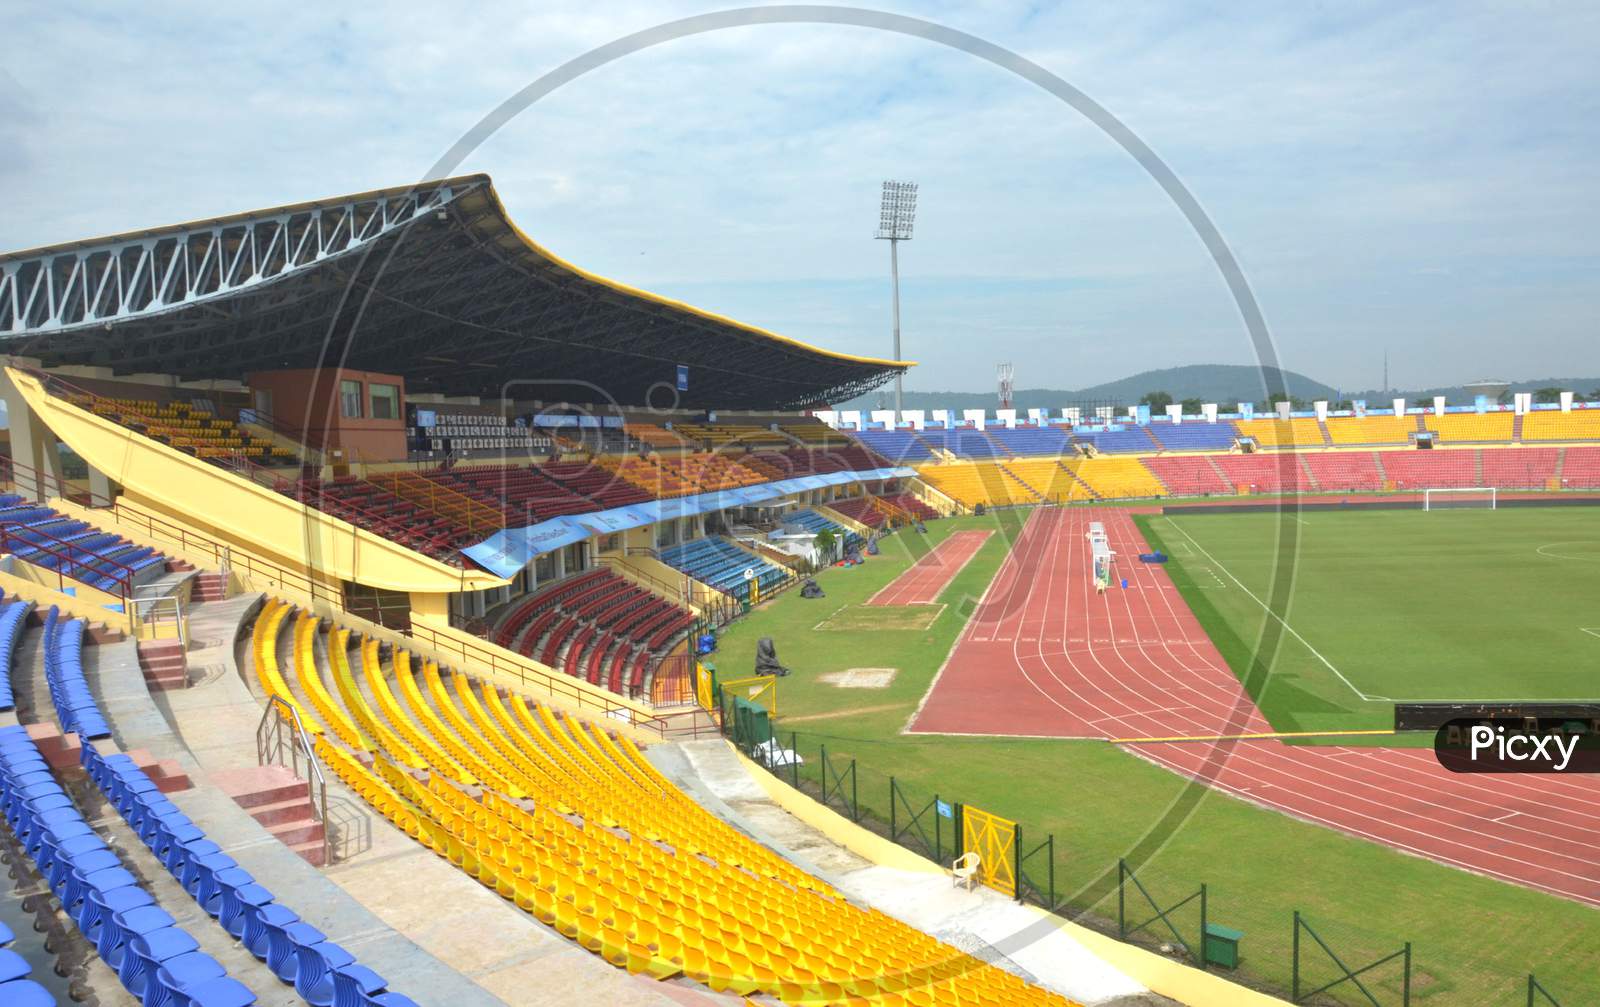 A View of Stadium Chair